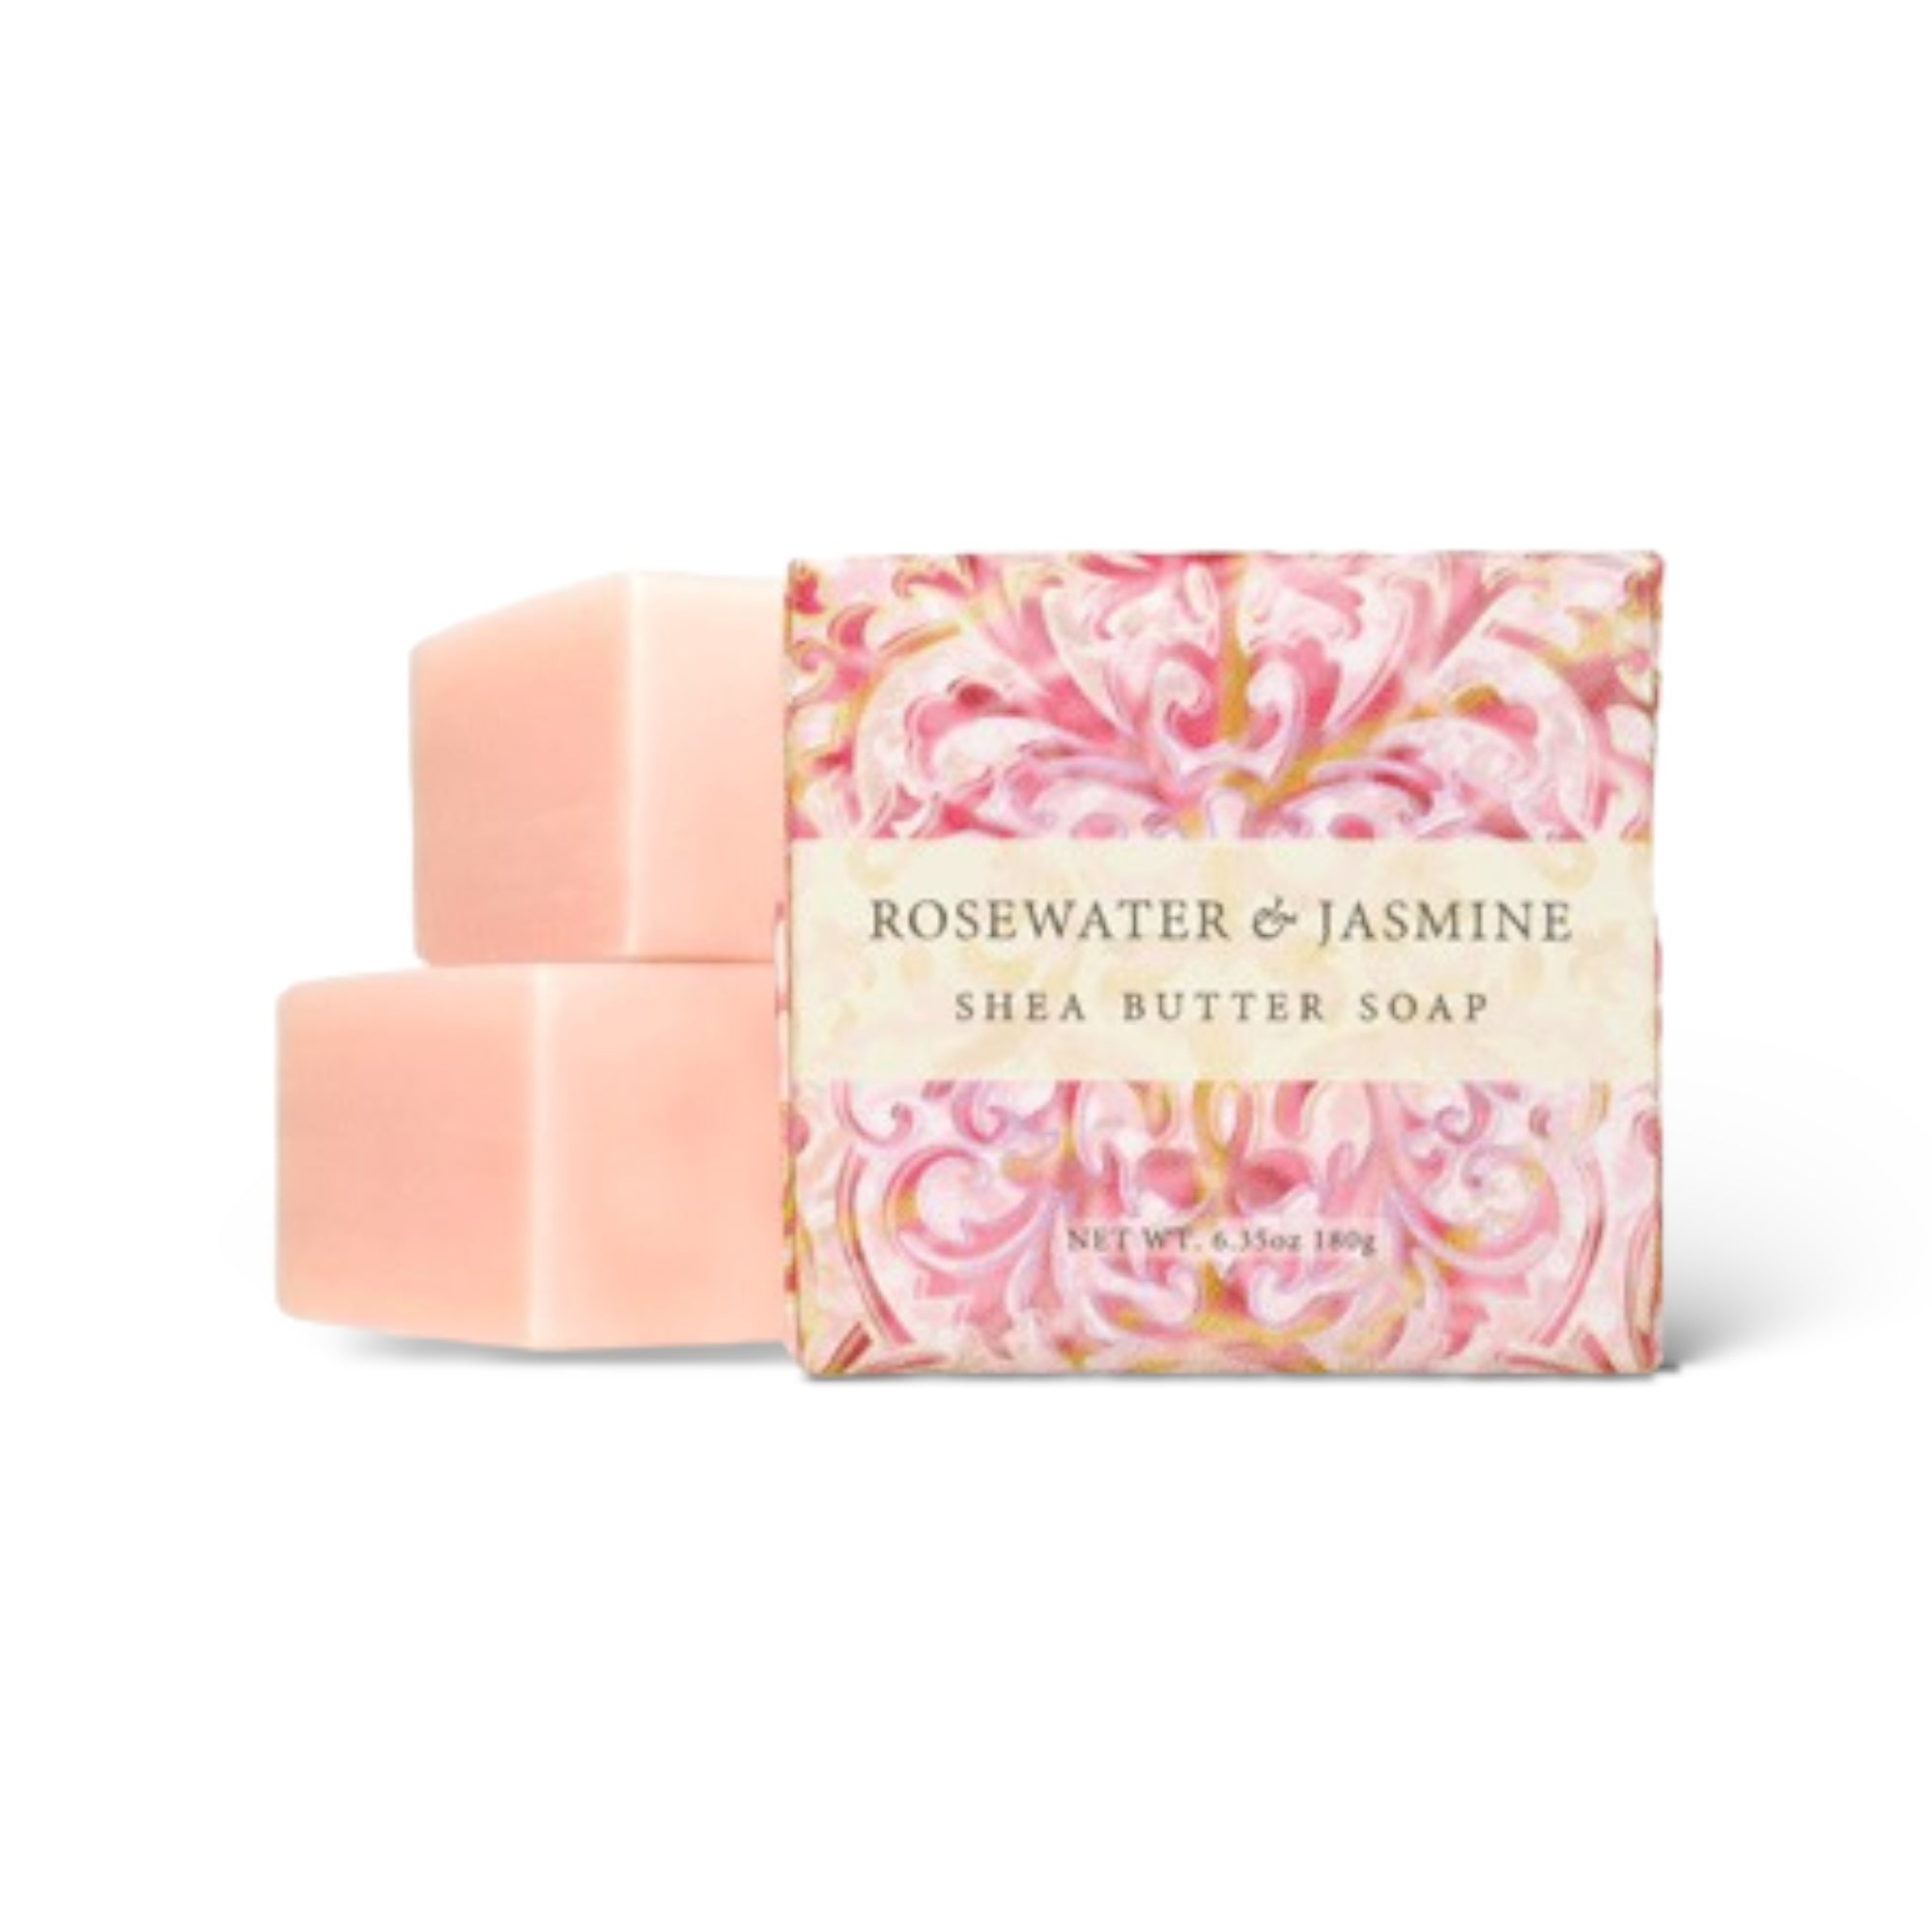 Rosewater & Jasmine Shea Butter Soap by Greenwich Bay Trading Co.